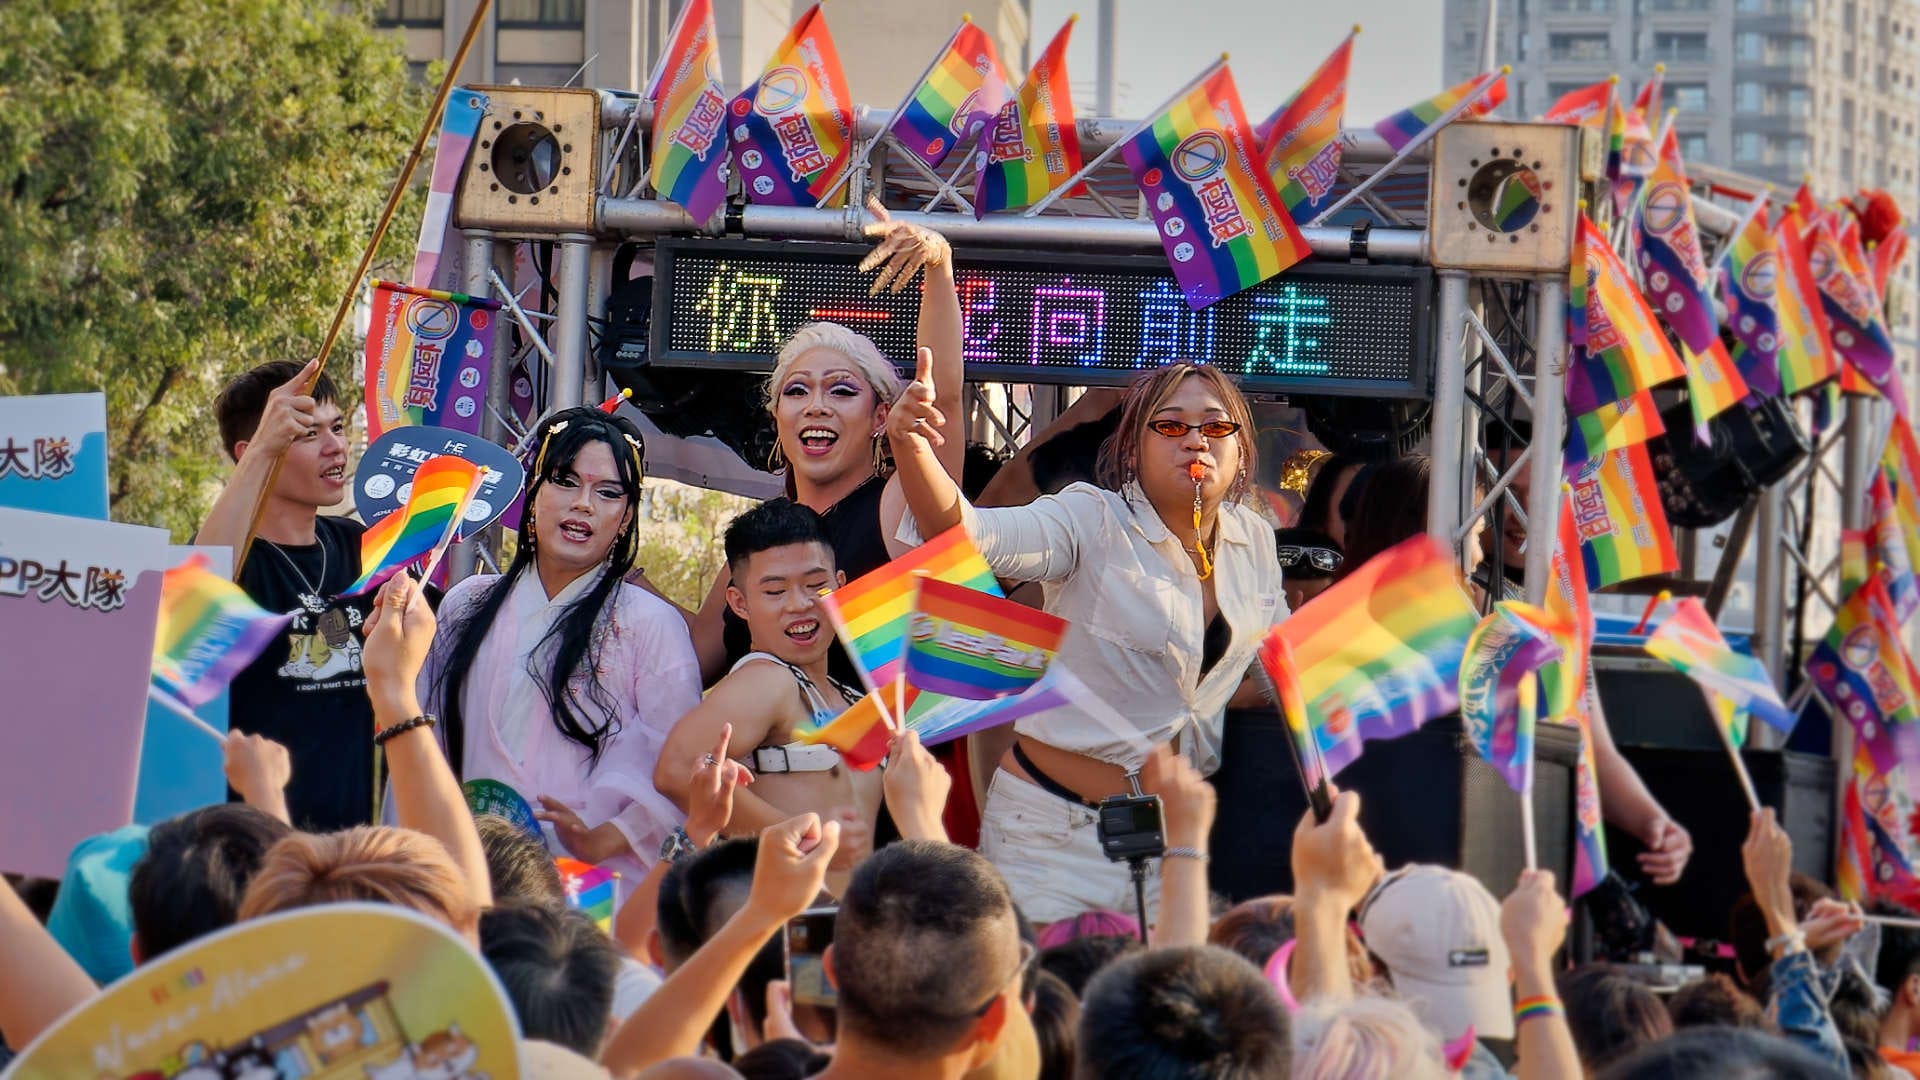 Group of people singing and dancing, surrounded by rainbow flags.